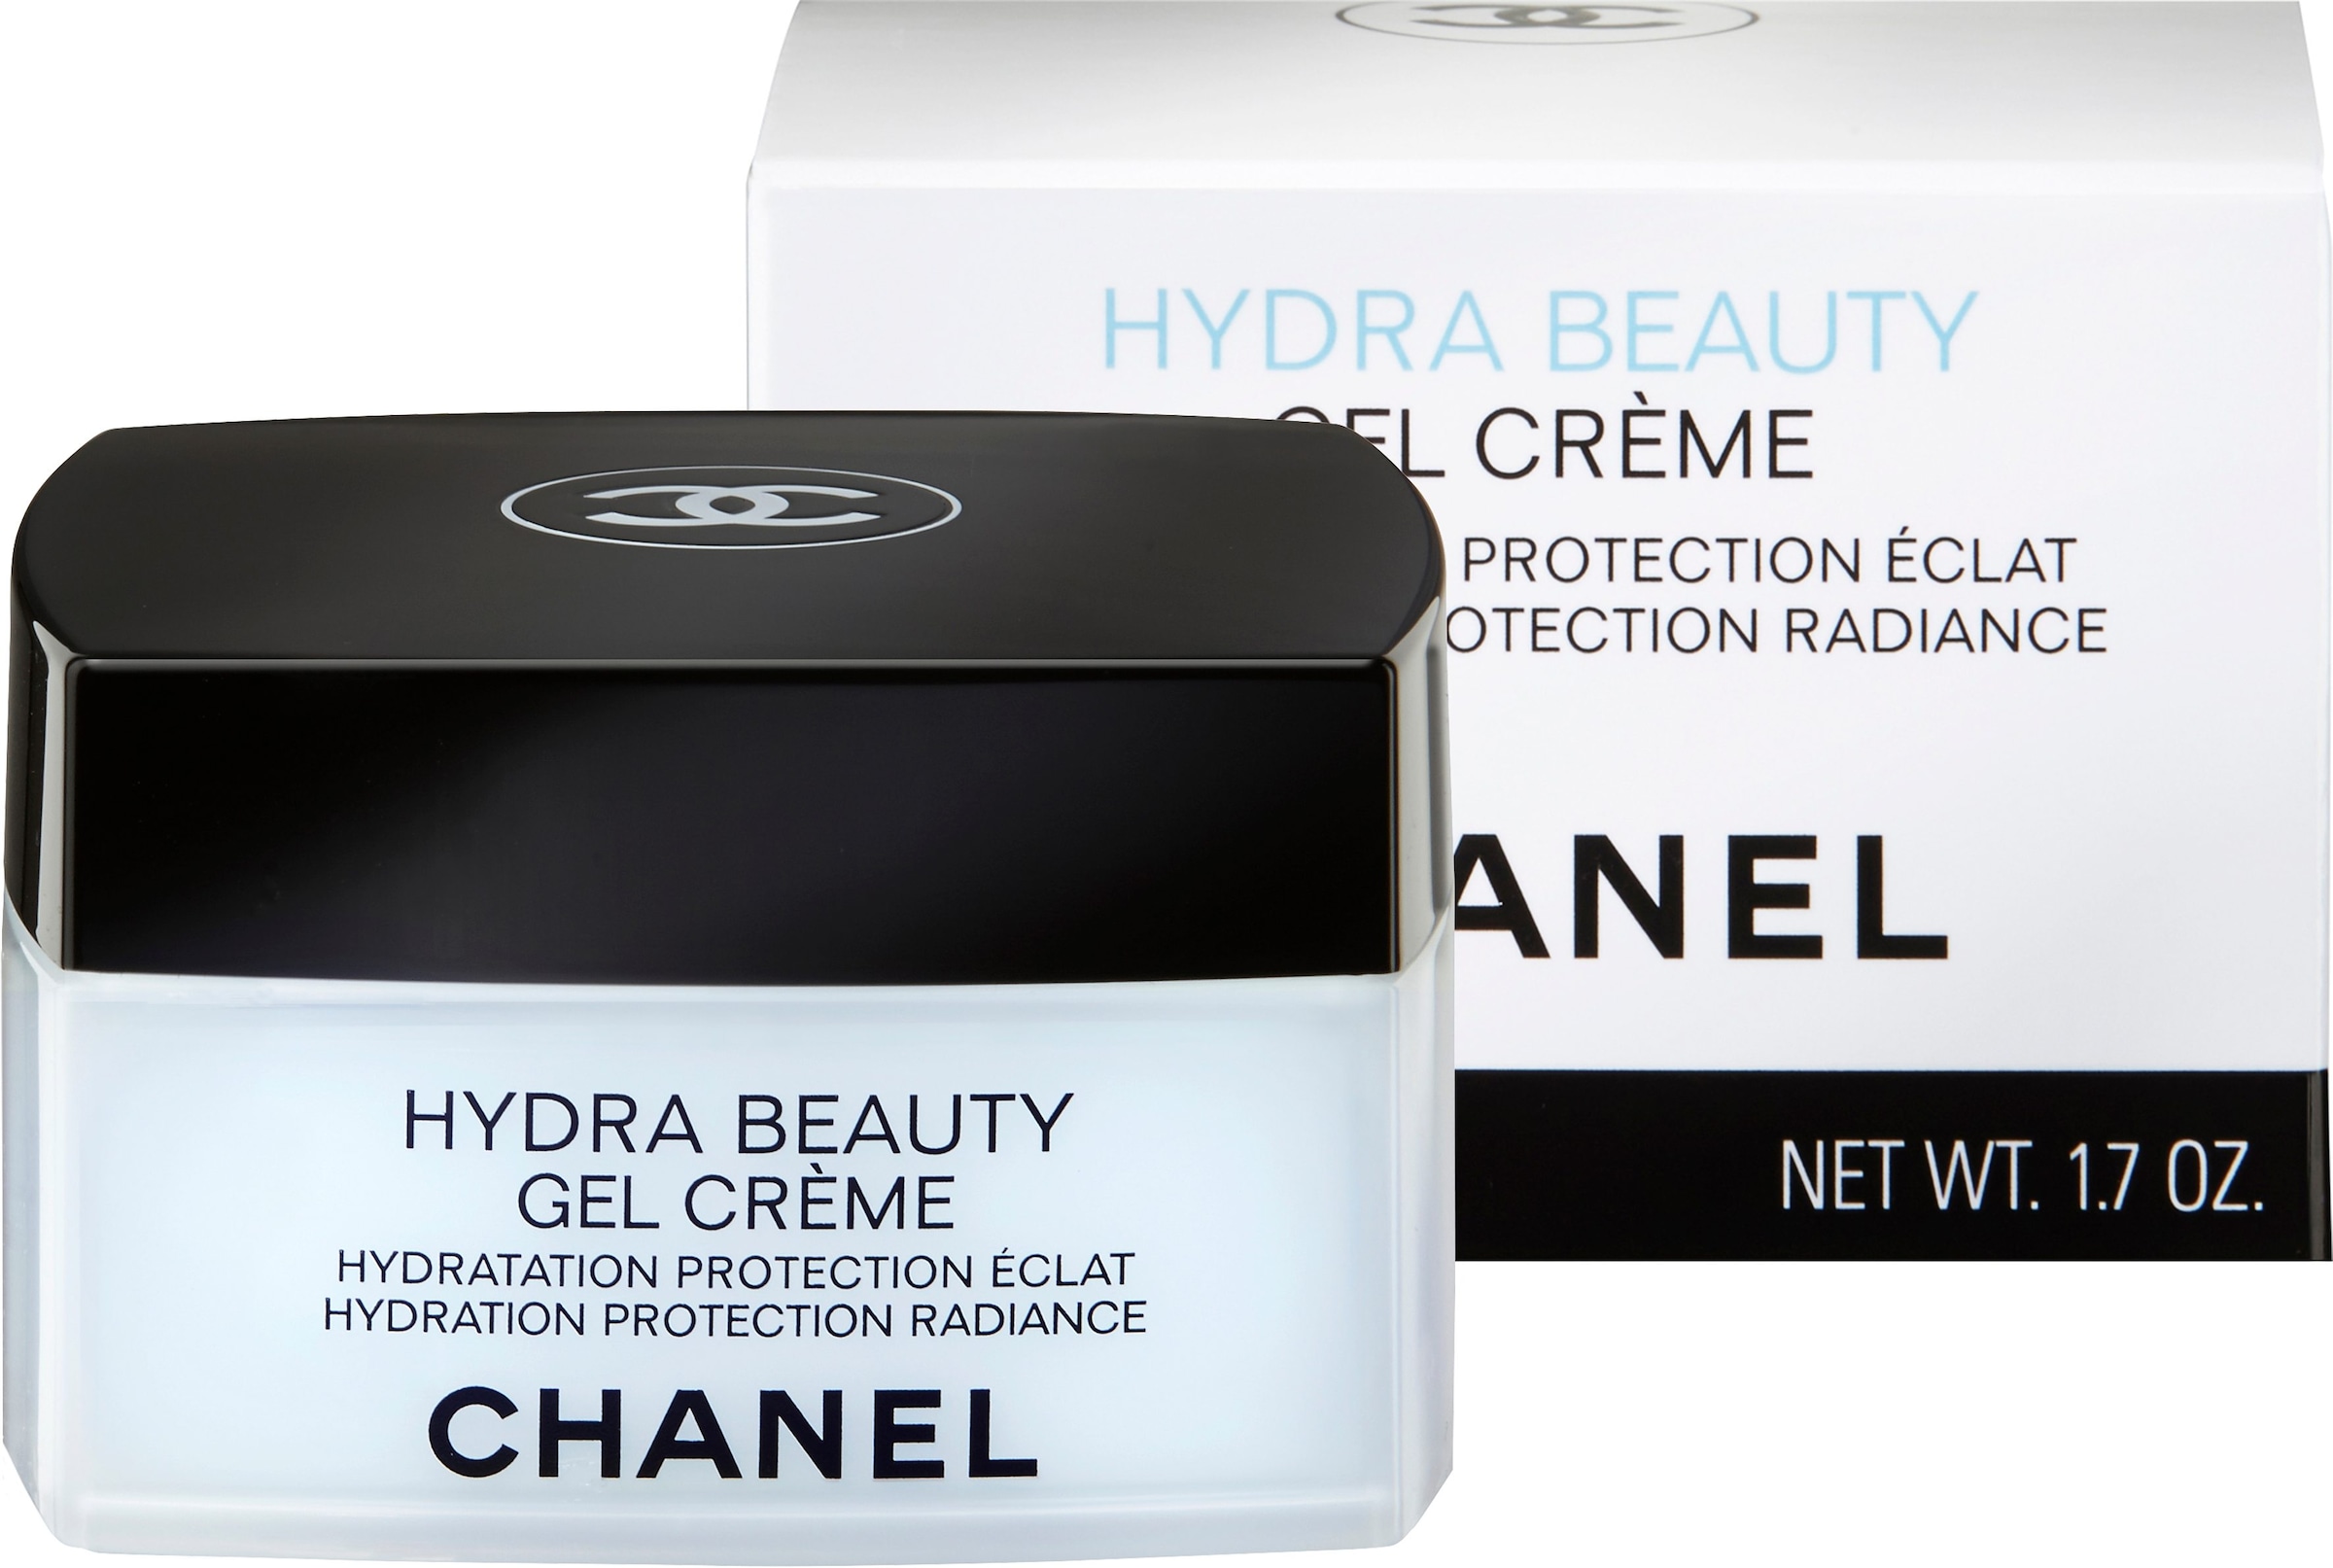 Review, Chanel Hydra Beauty Creme